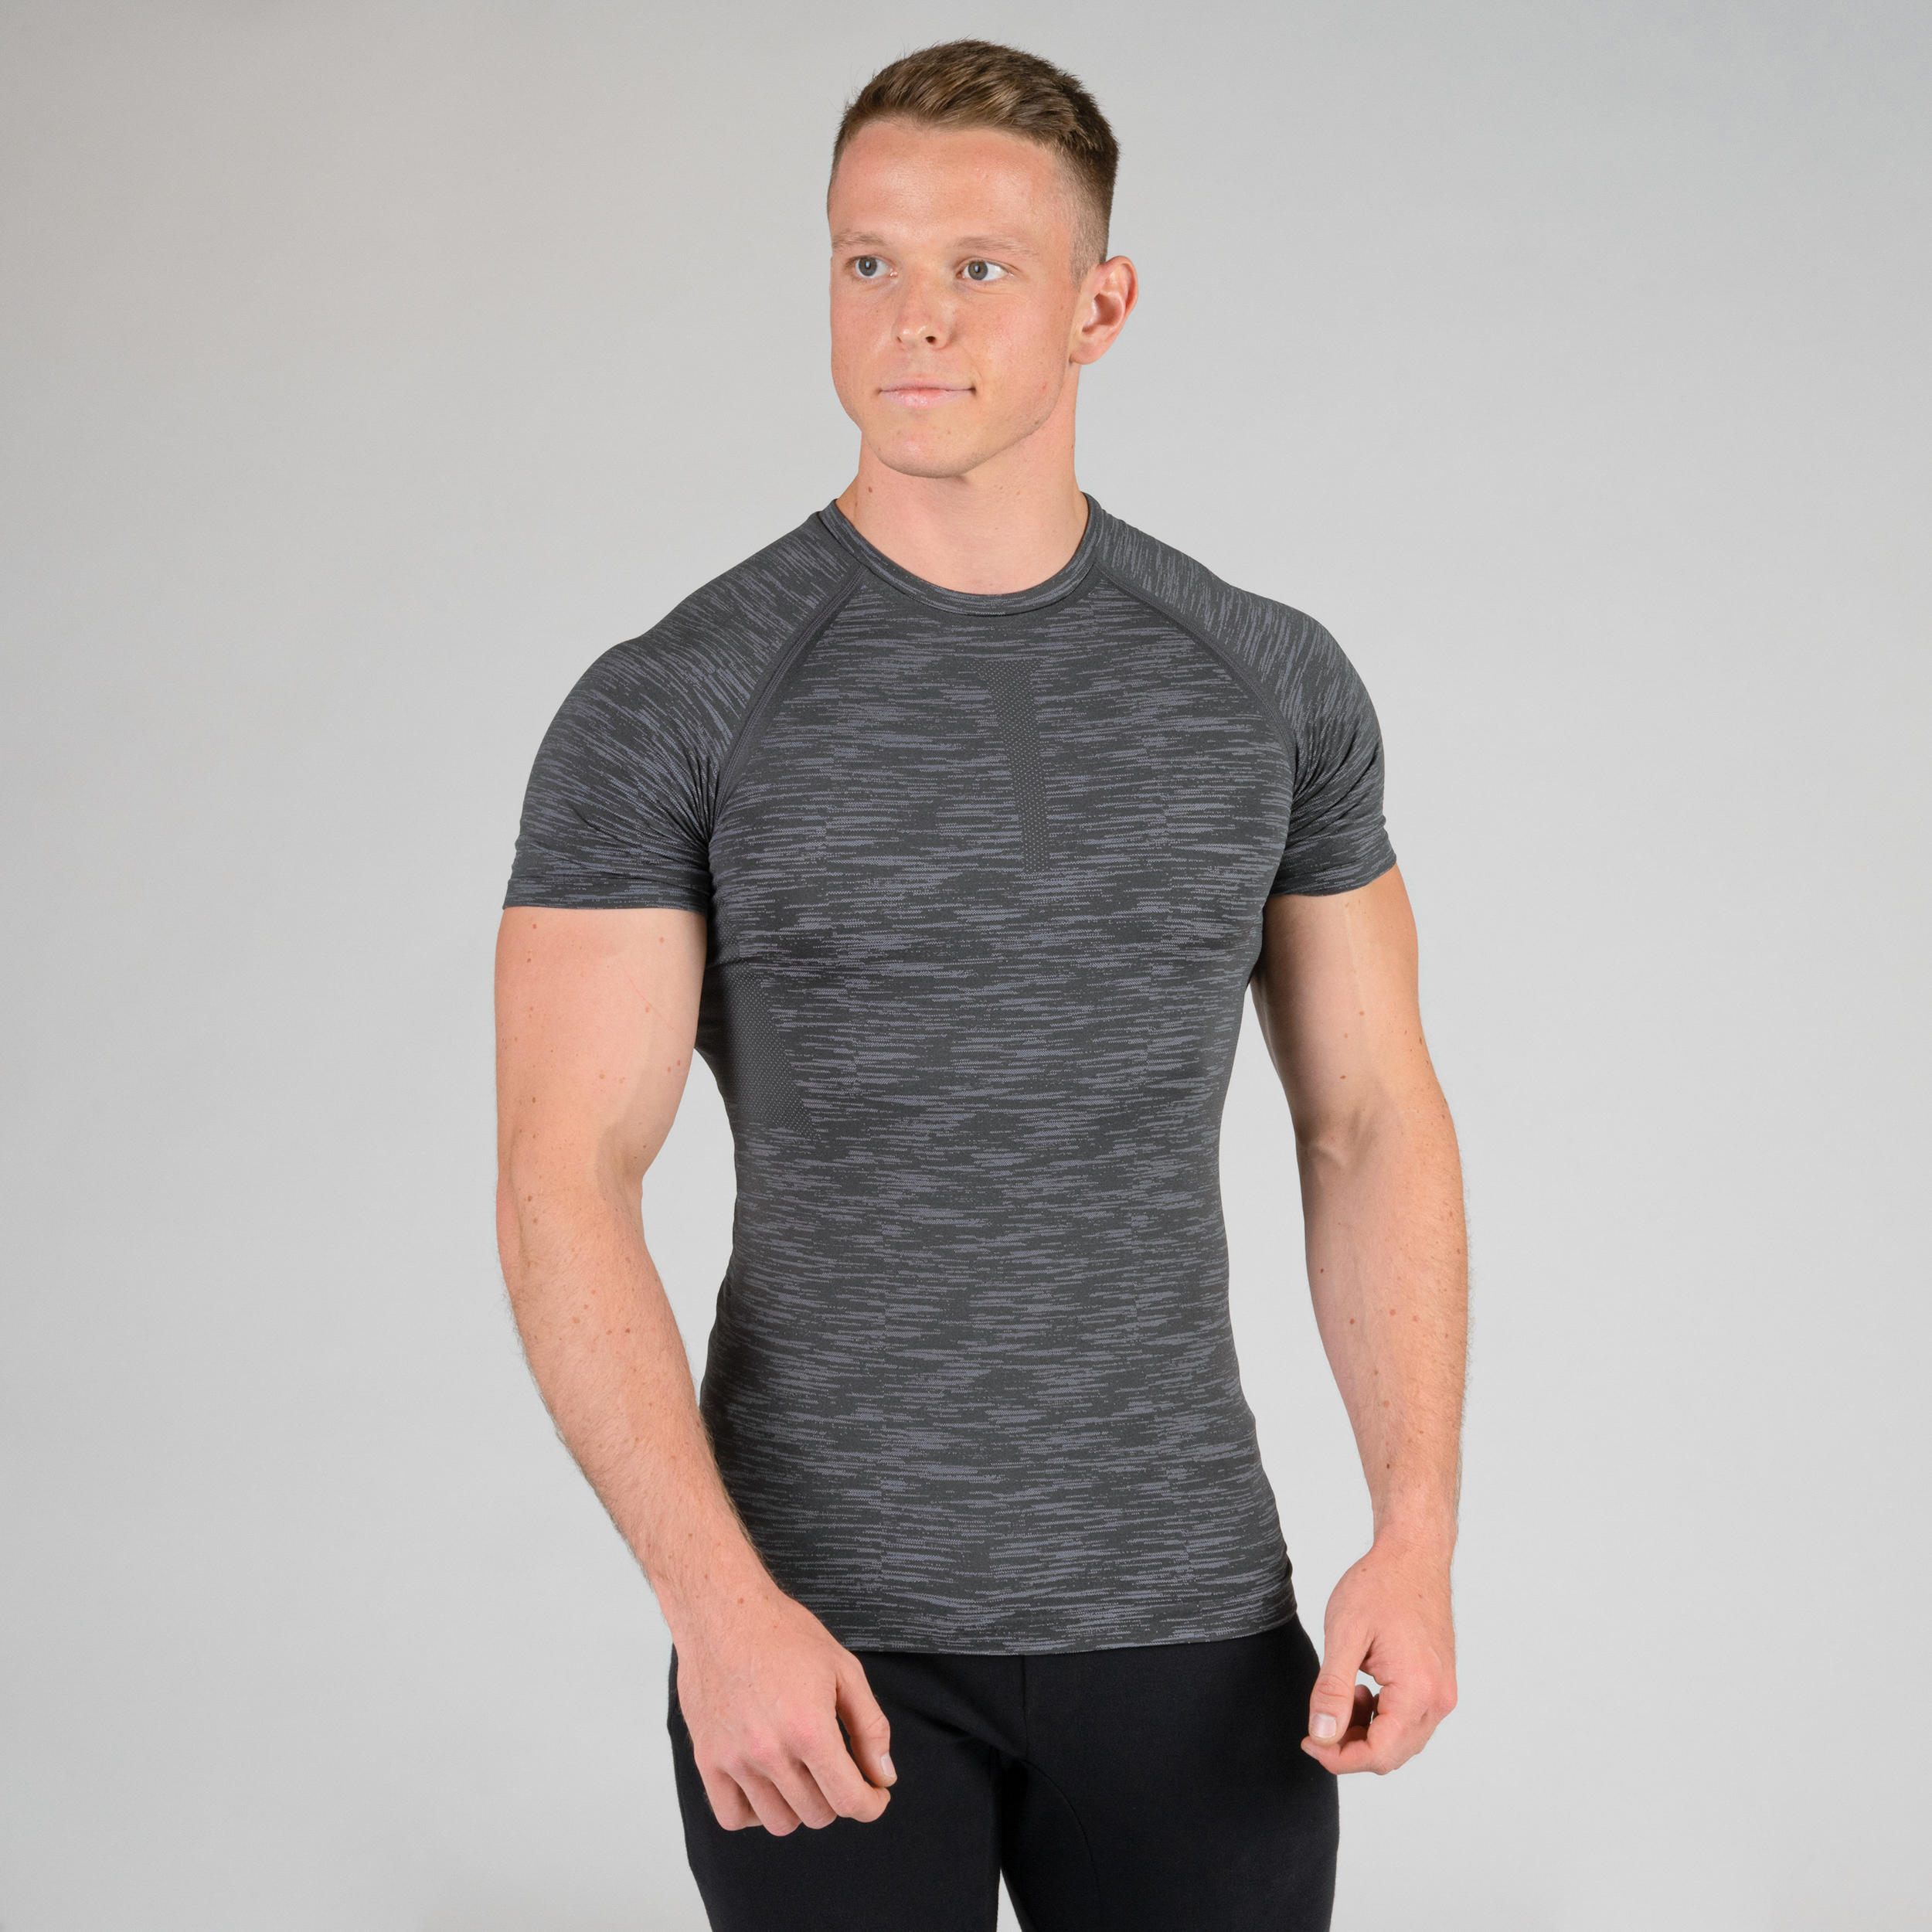 Men's Breathable Short-Sleeved Crew Neck Weight Training Compression  T-Shirt - Grey